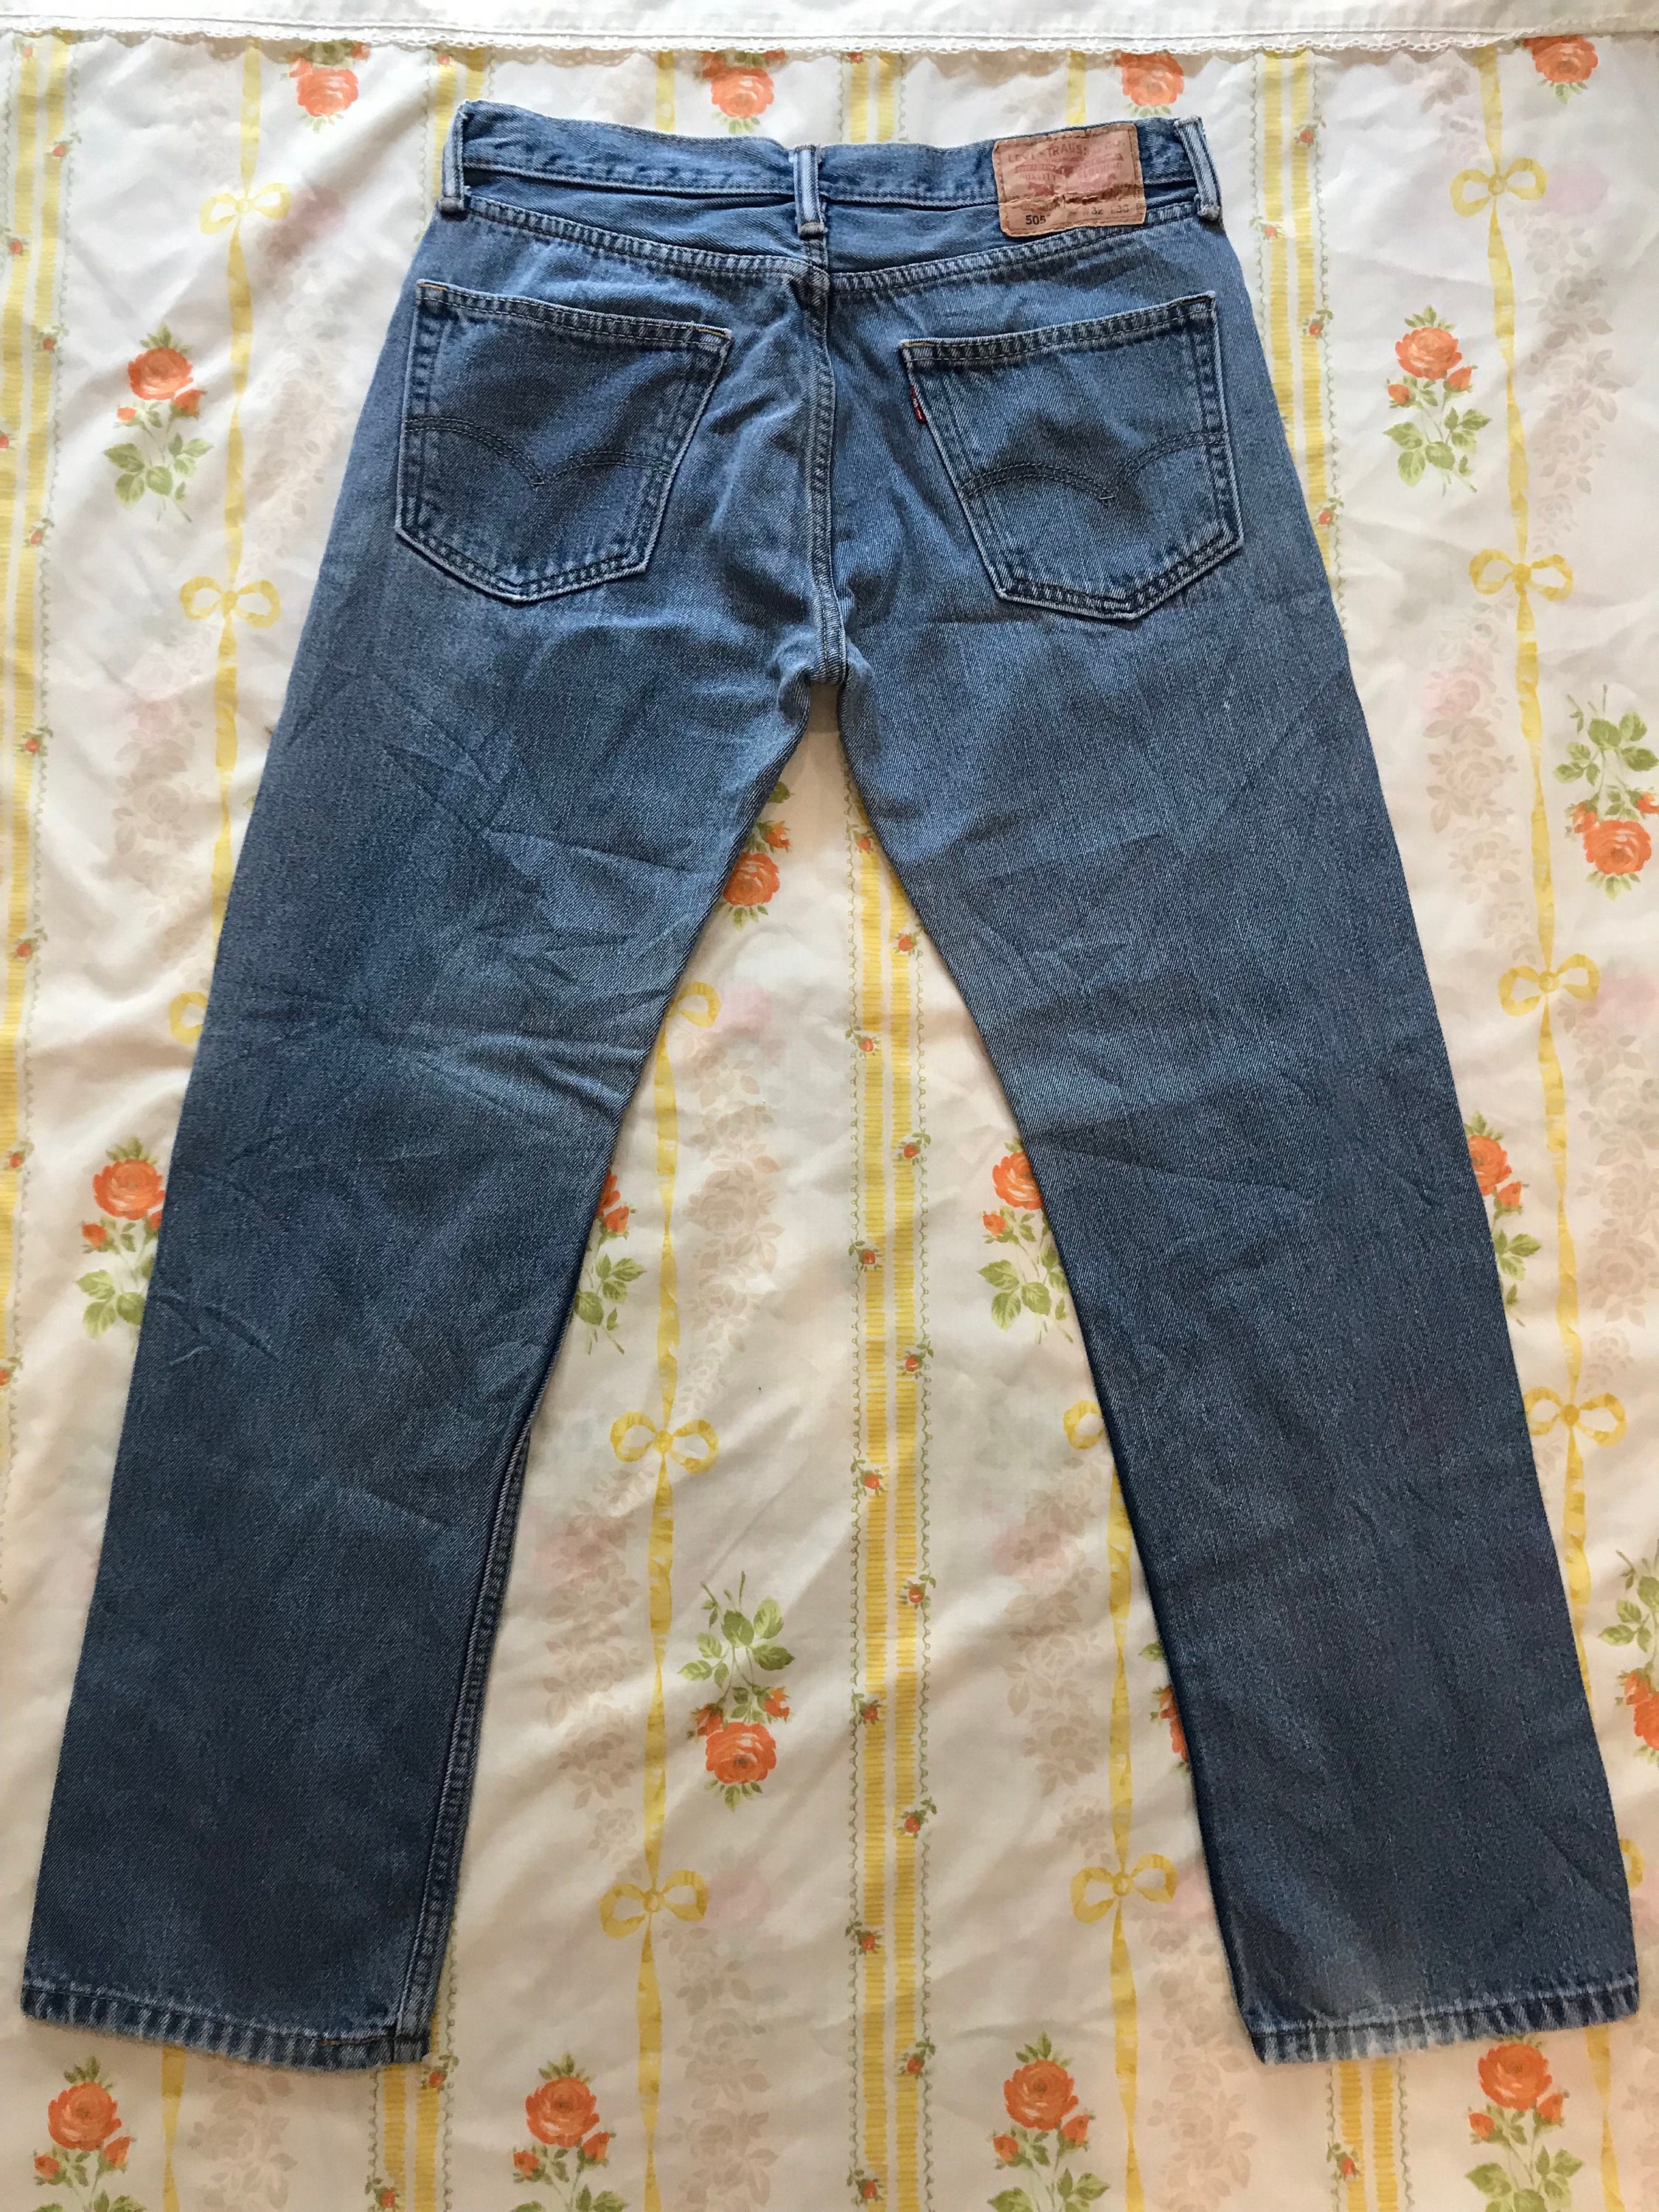 1980s-90s Vintage High-Waisted Levi Jeans | Etsy